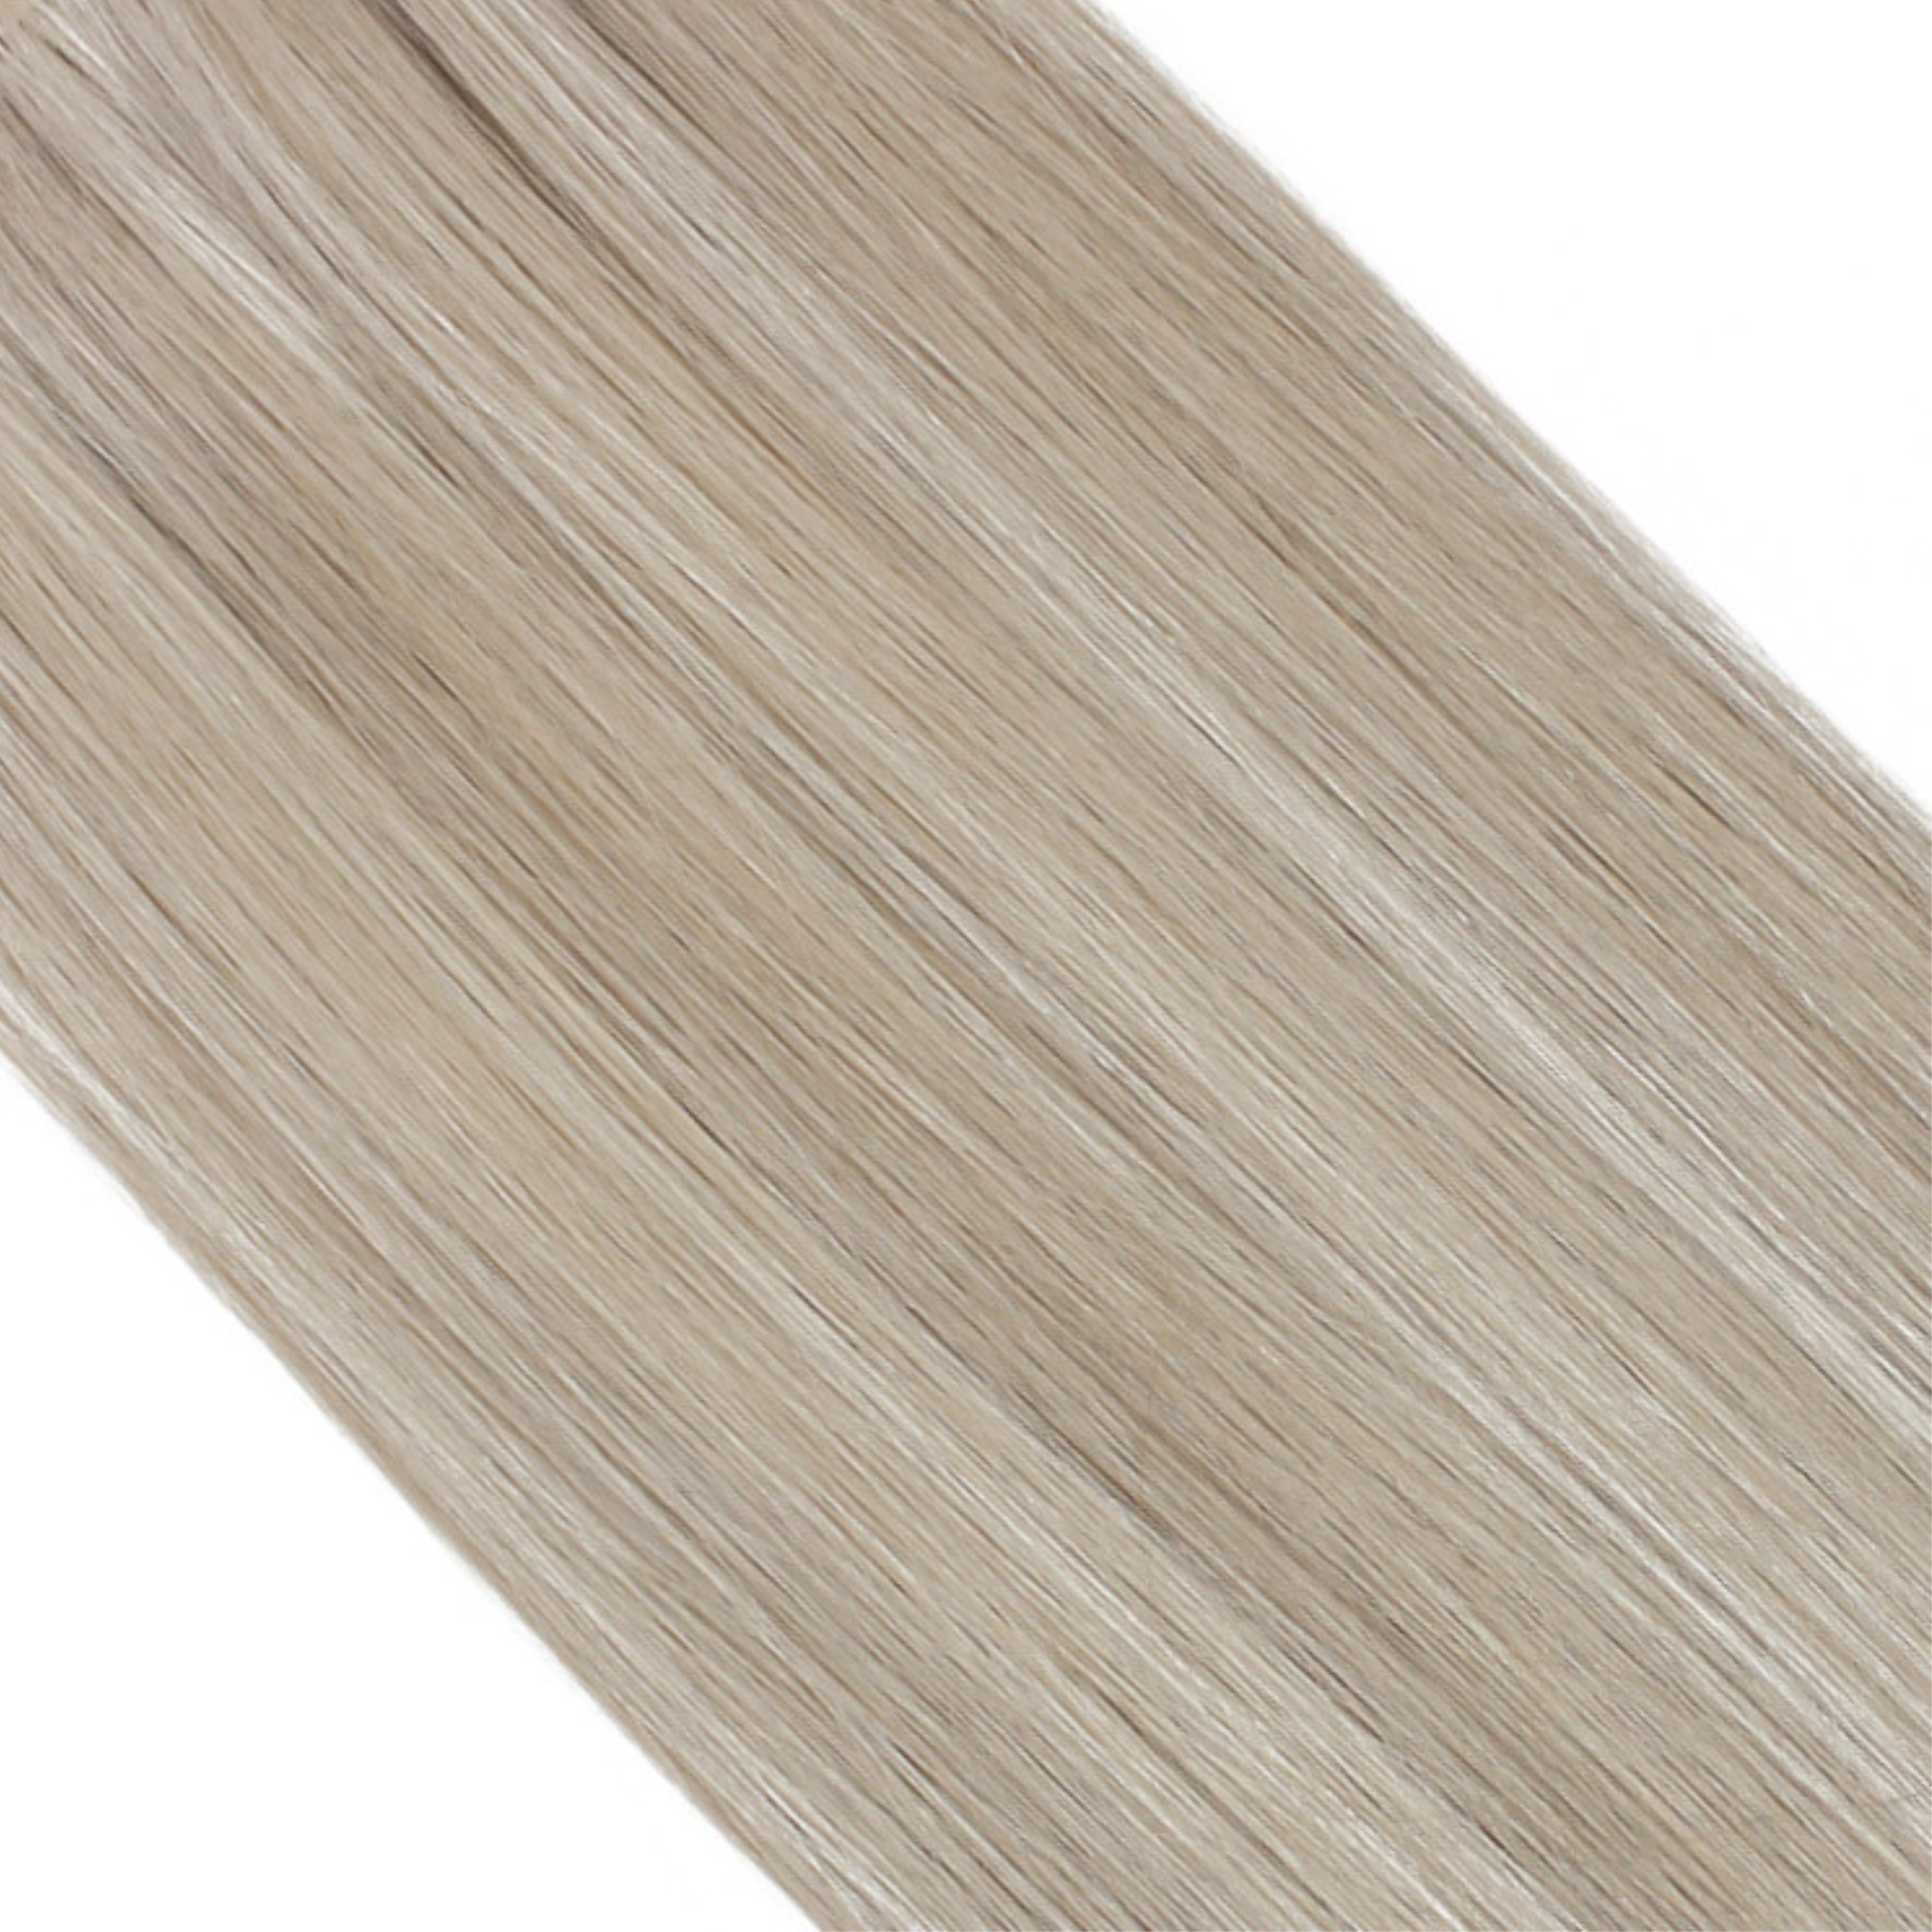 "hair rehab london 22" weft hair extensions shade swatch titled steel blonde"